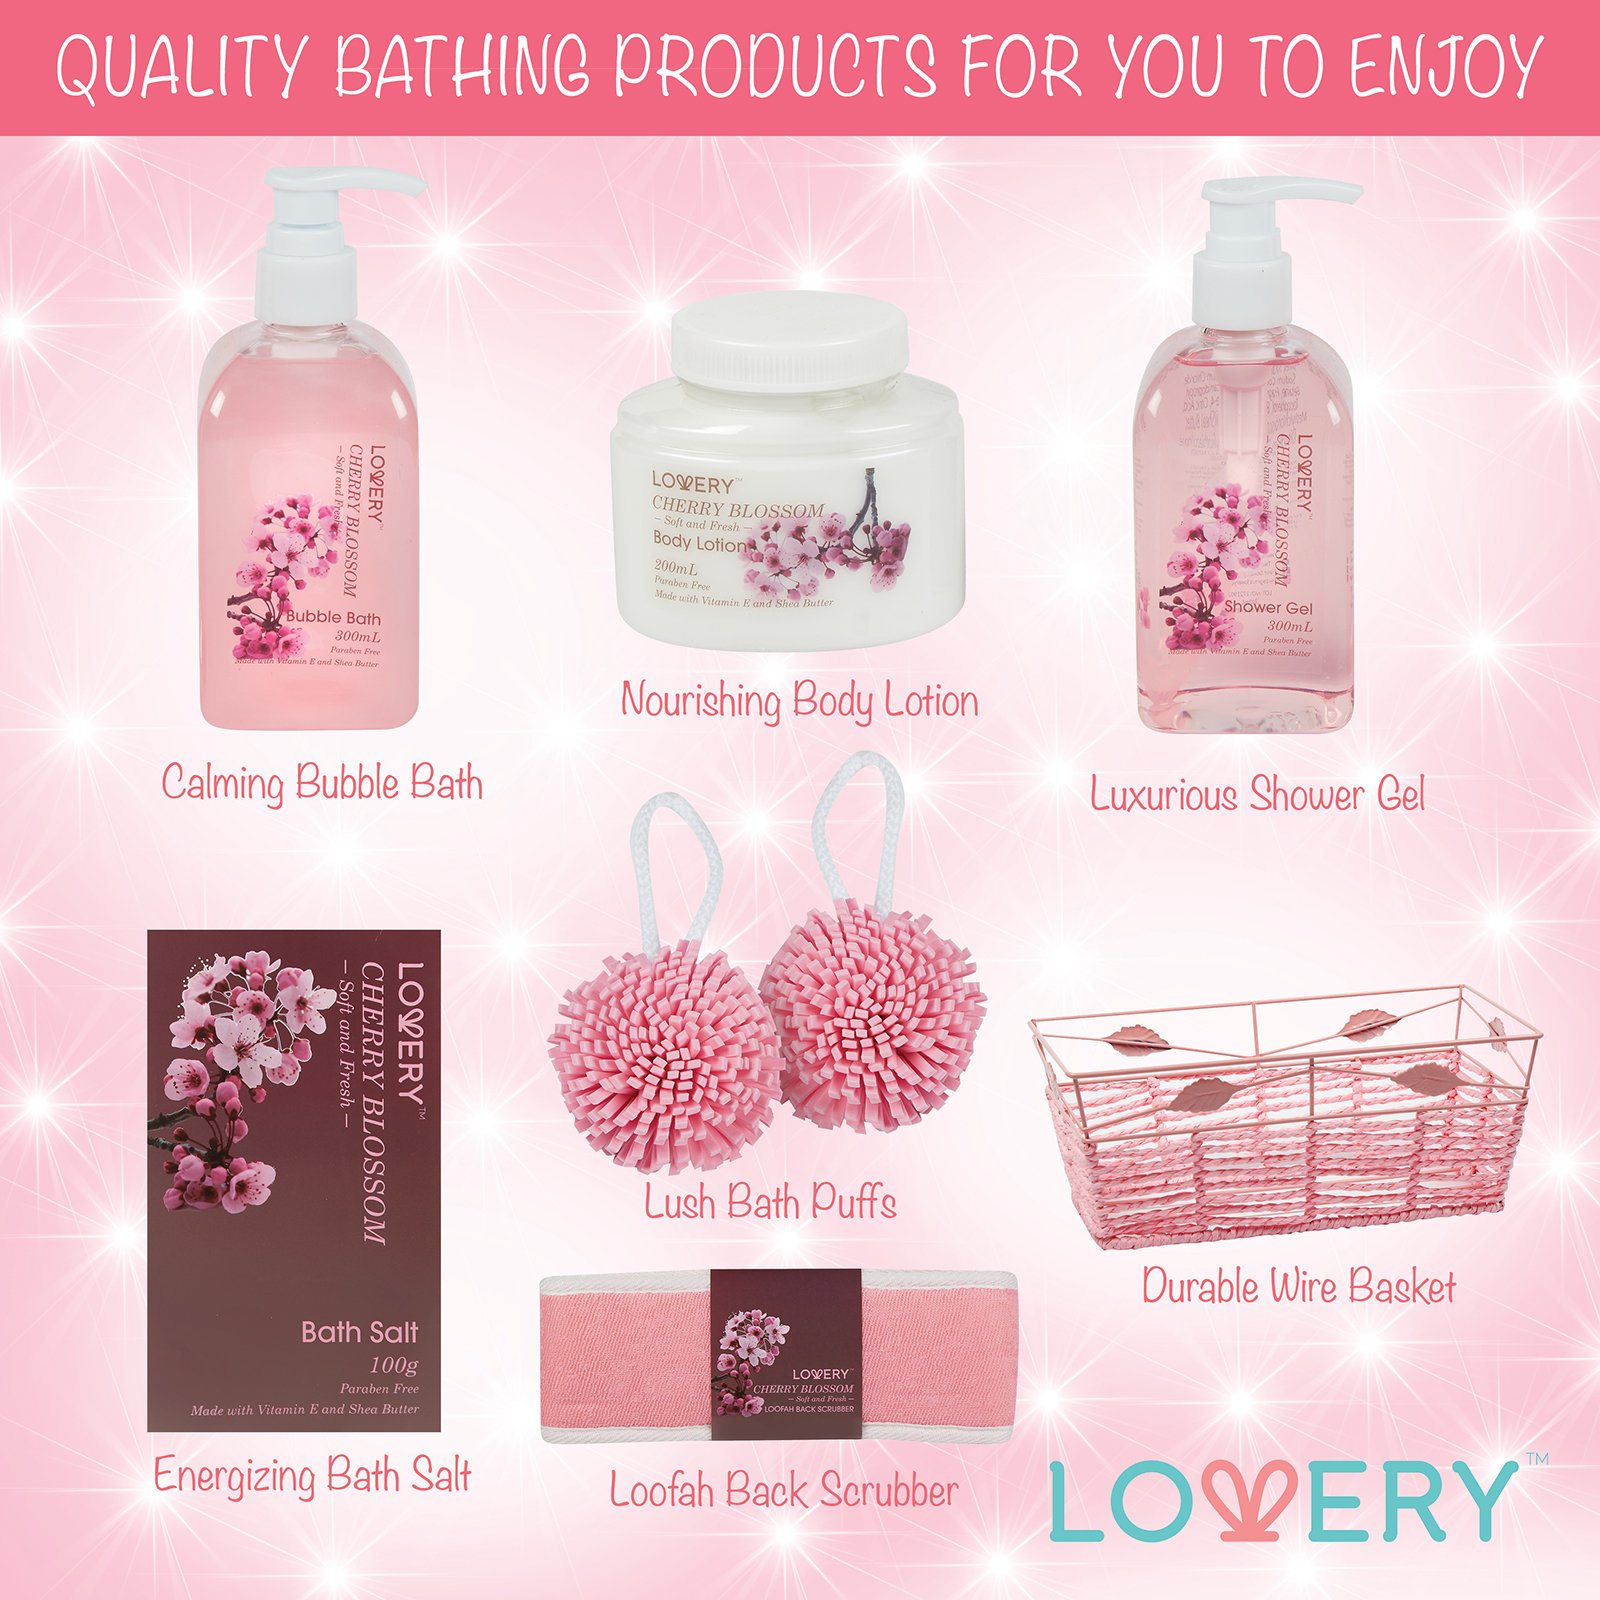 Birthday Gifts For Her, Spa Gift Basket in Cherry Blossom Fragrance - 8pc Bath Set with Shower Gel, Bubble Bath, Bath Salt, Lotion & More! Great Wedding, Anniversary or Graduation Gift for Women